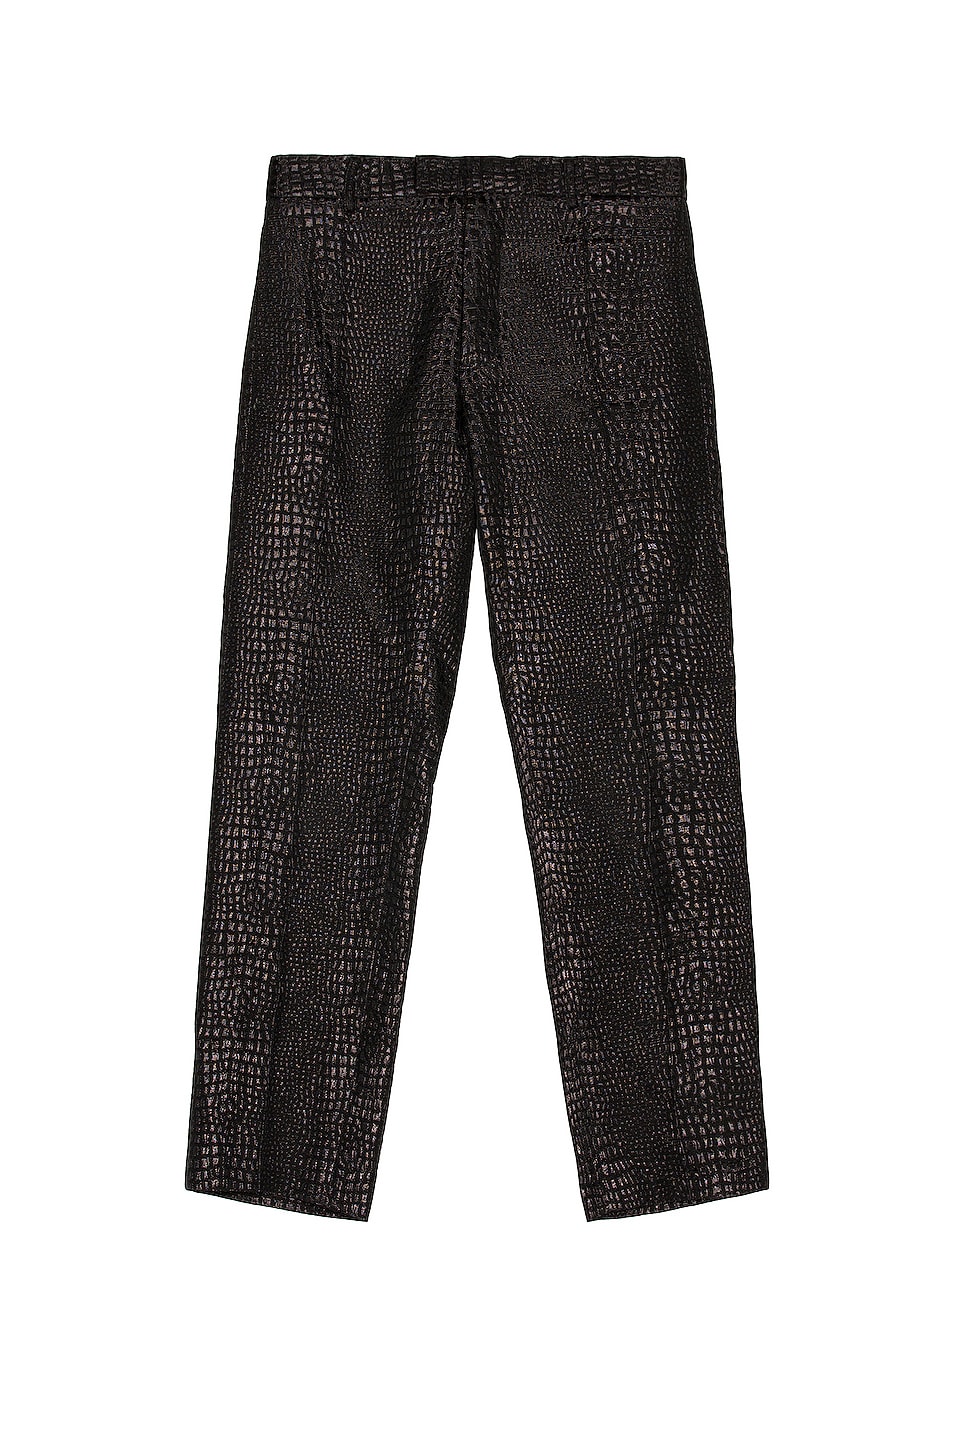 Image 1 of CHRISTIAN COWAN Brocade Tailored Pant in Black 1